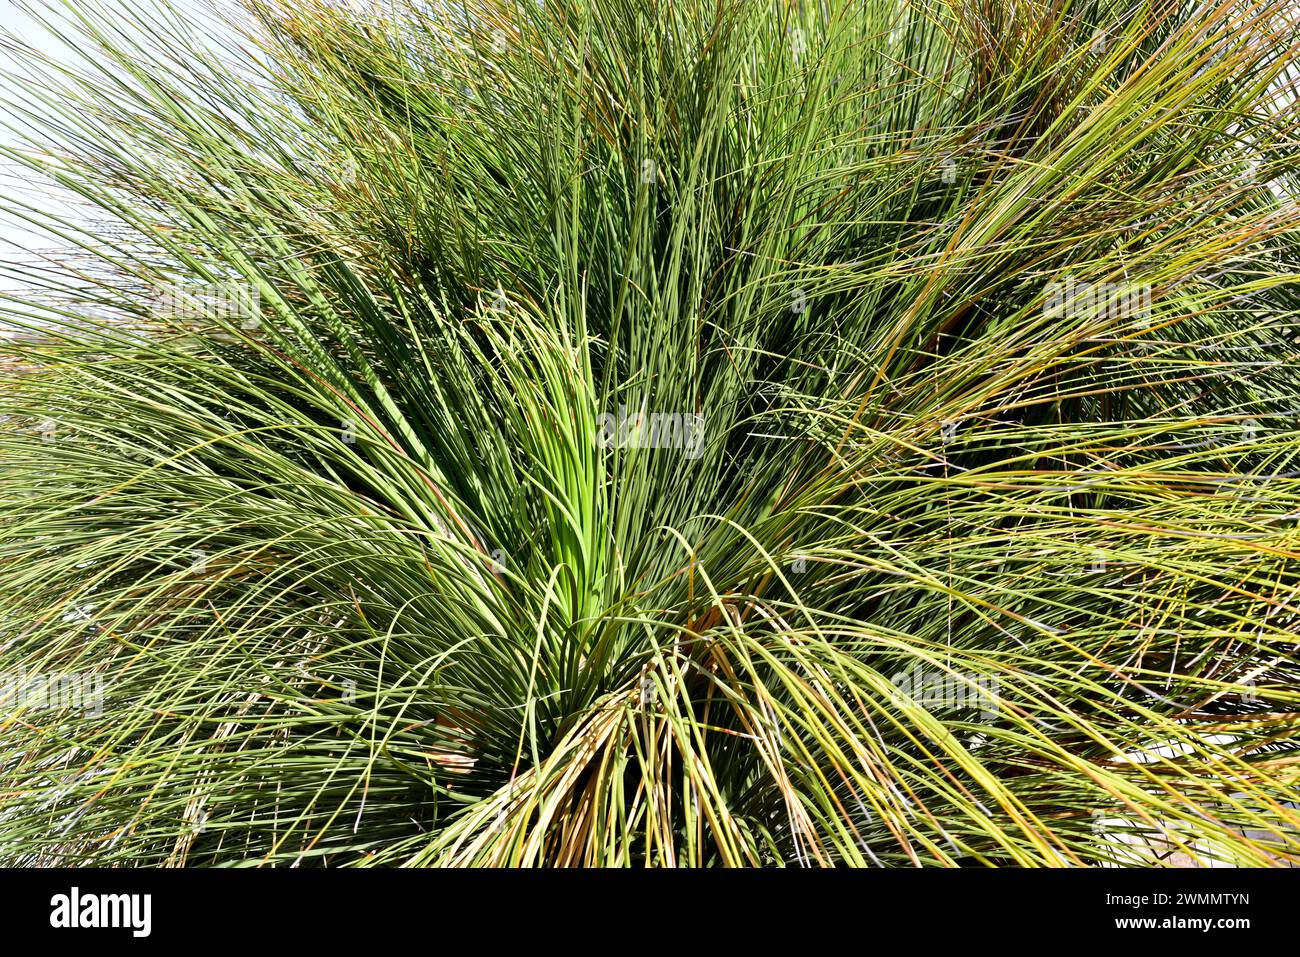 Junquillo (Dasylirion longissimum) is a shrub native to northern Mexico. Stock Photo